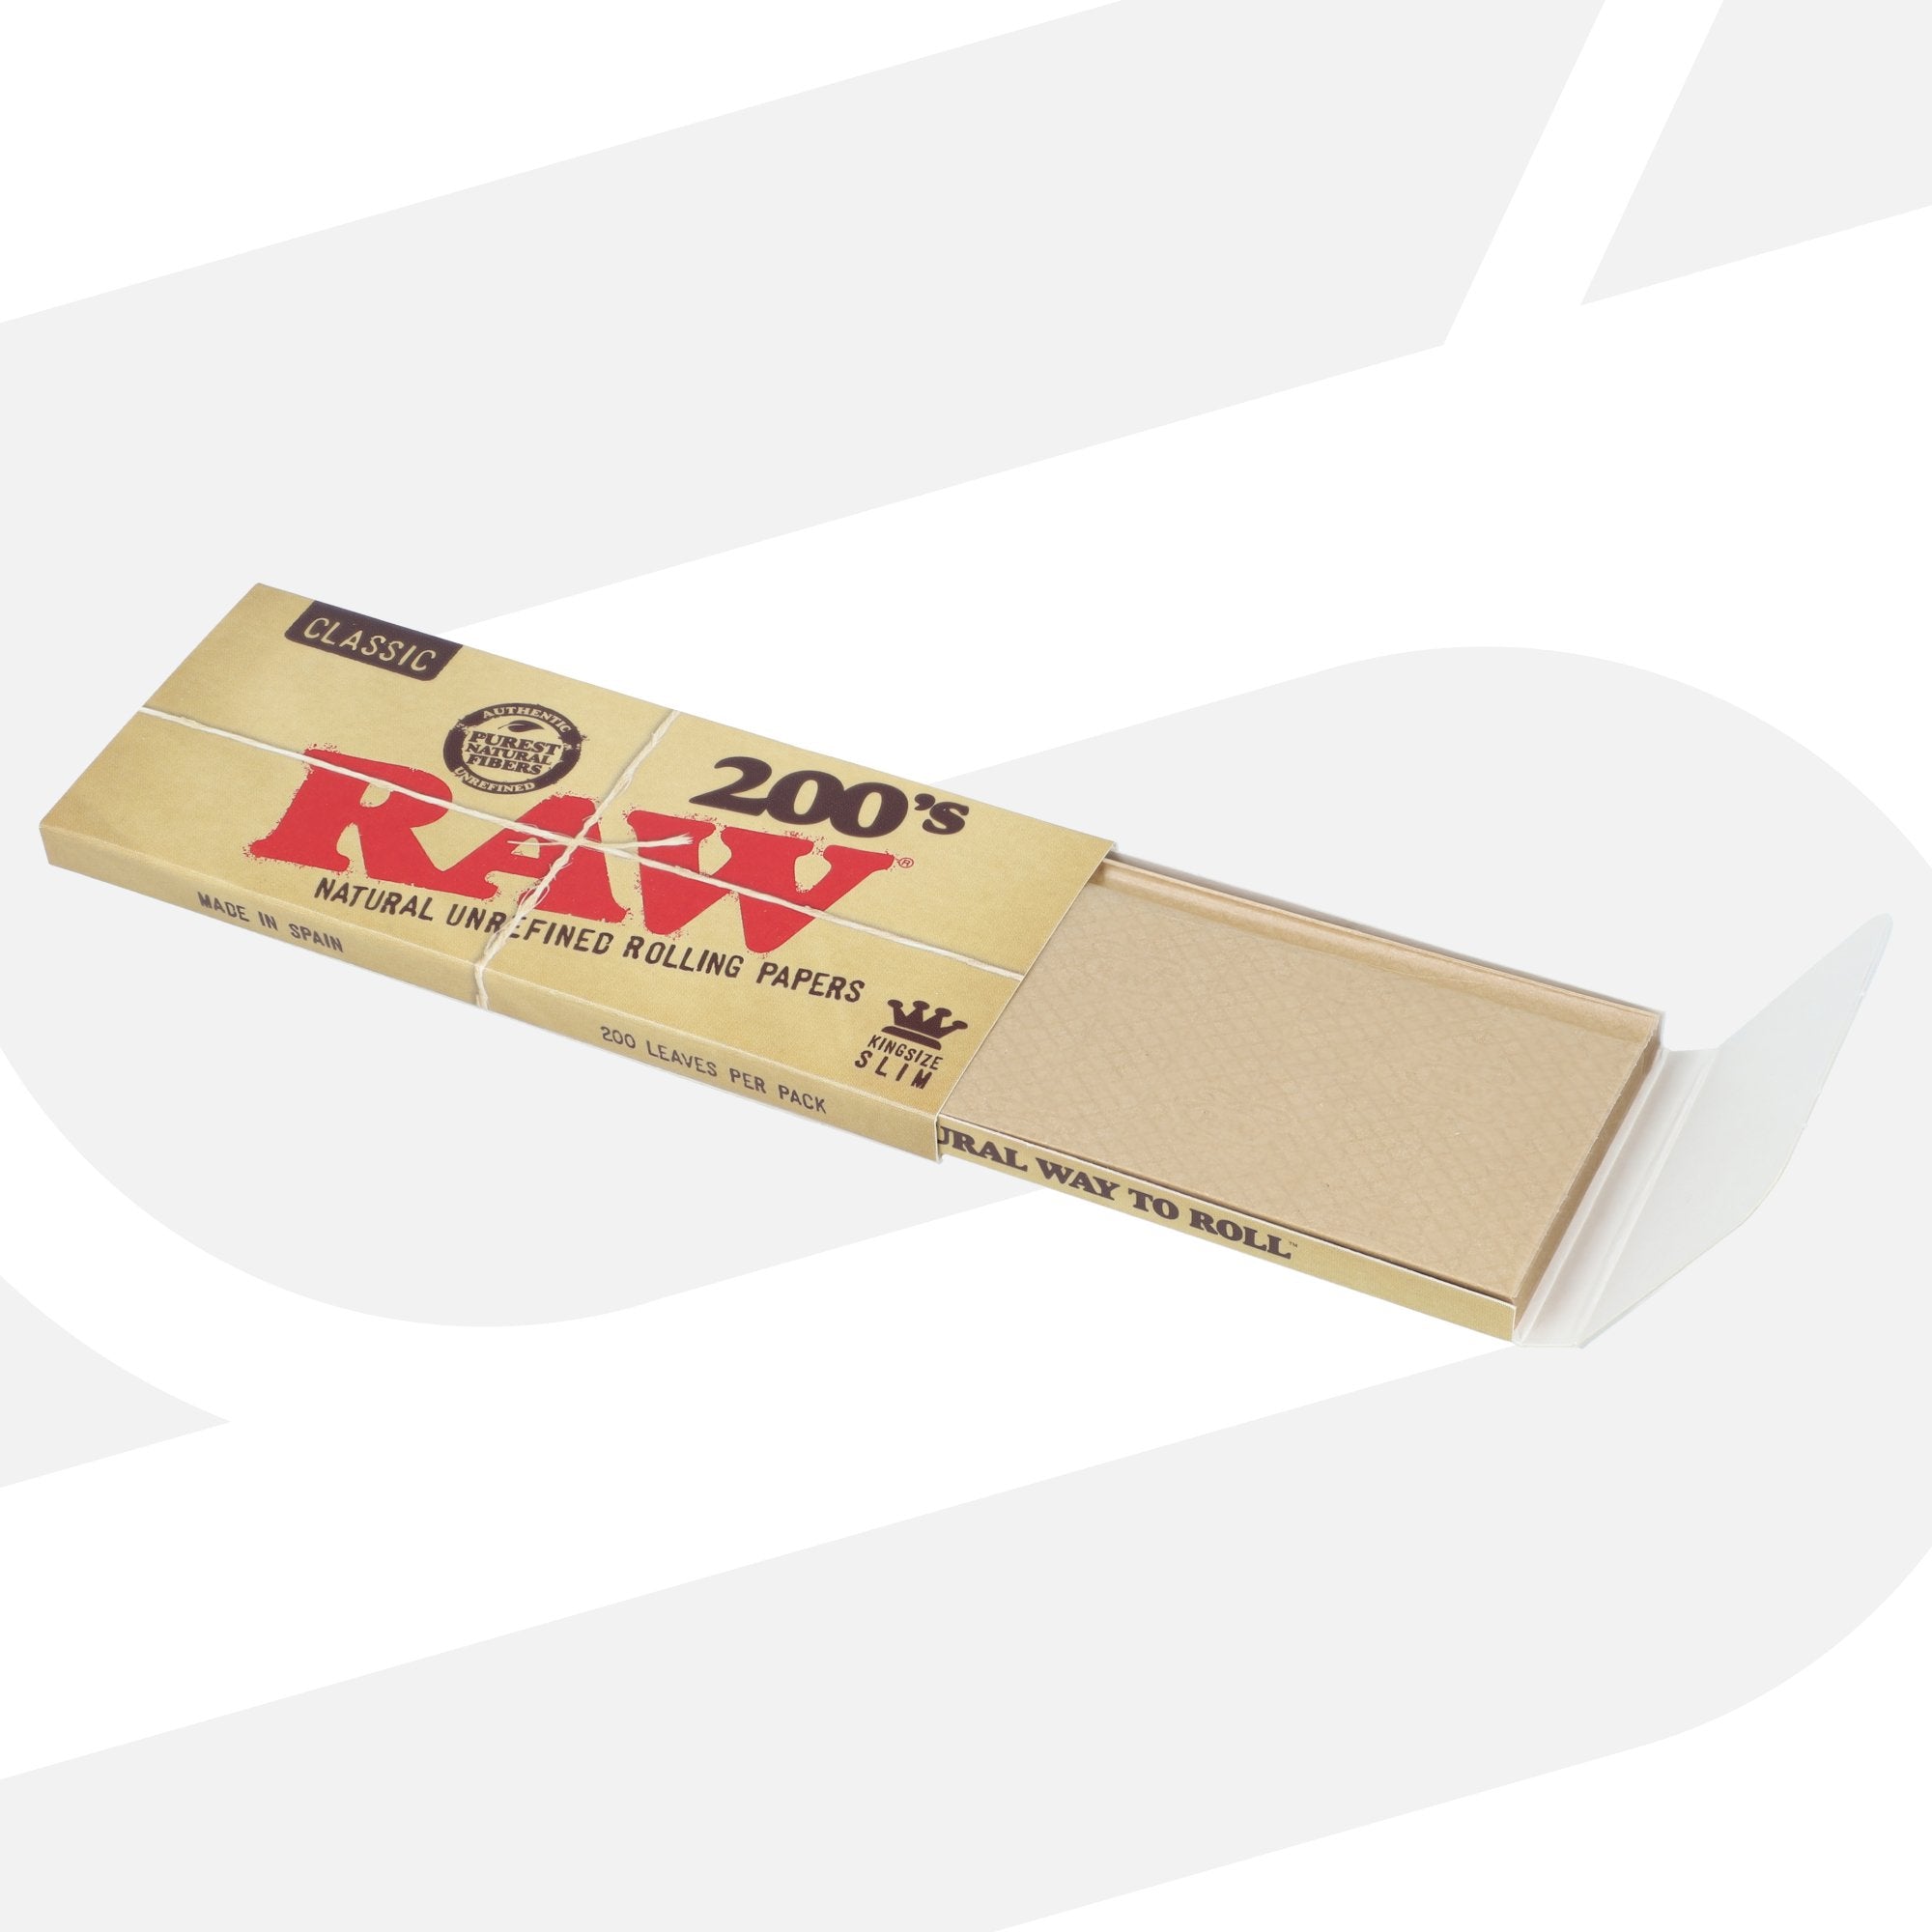 PAPEL RAW LARGO 200. 10 LIBRITOS. ROLLING PAPER KING SIZE